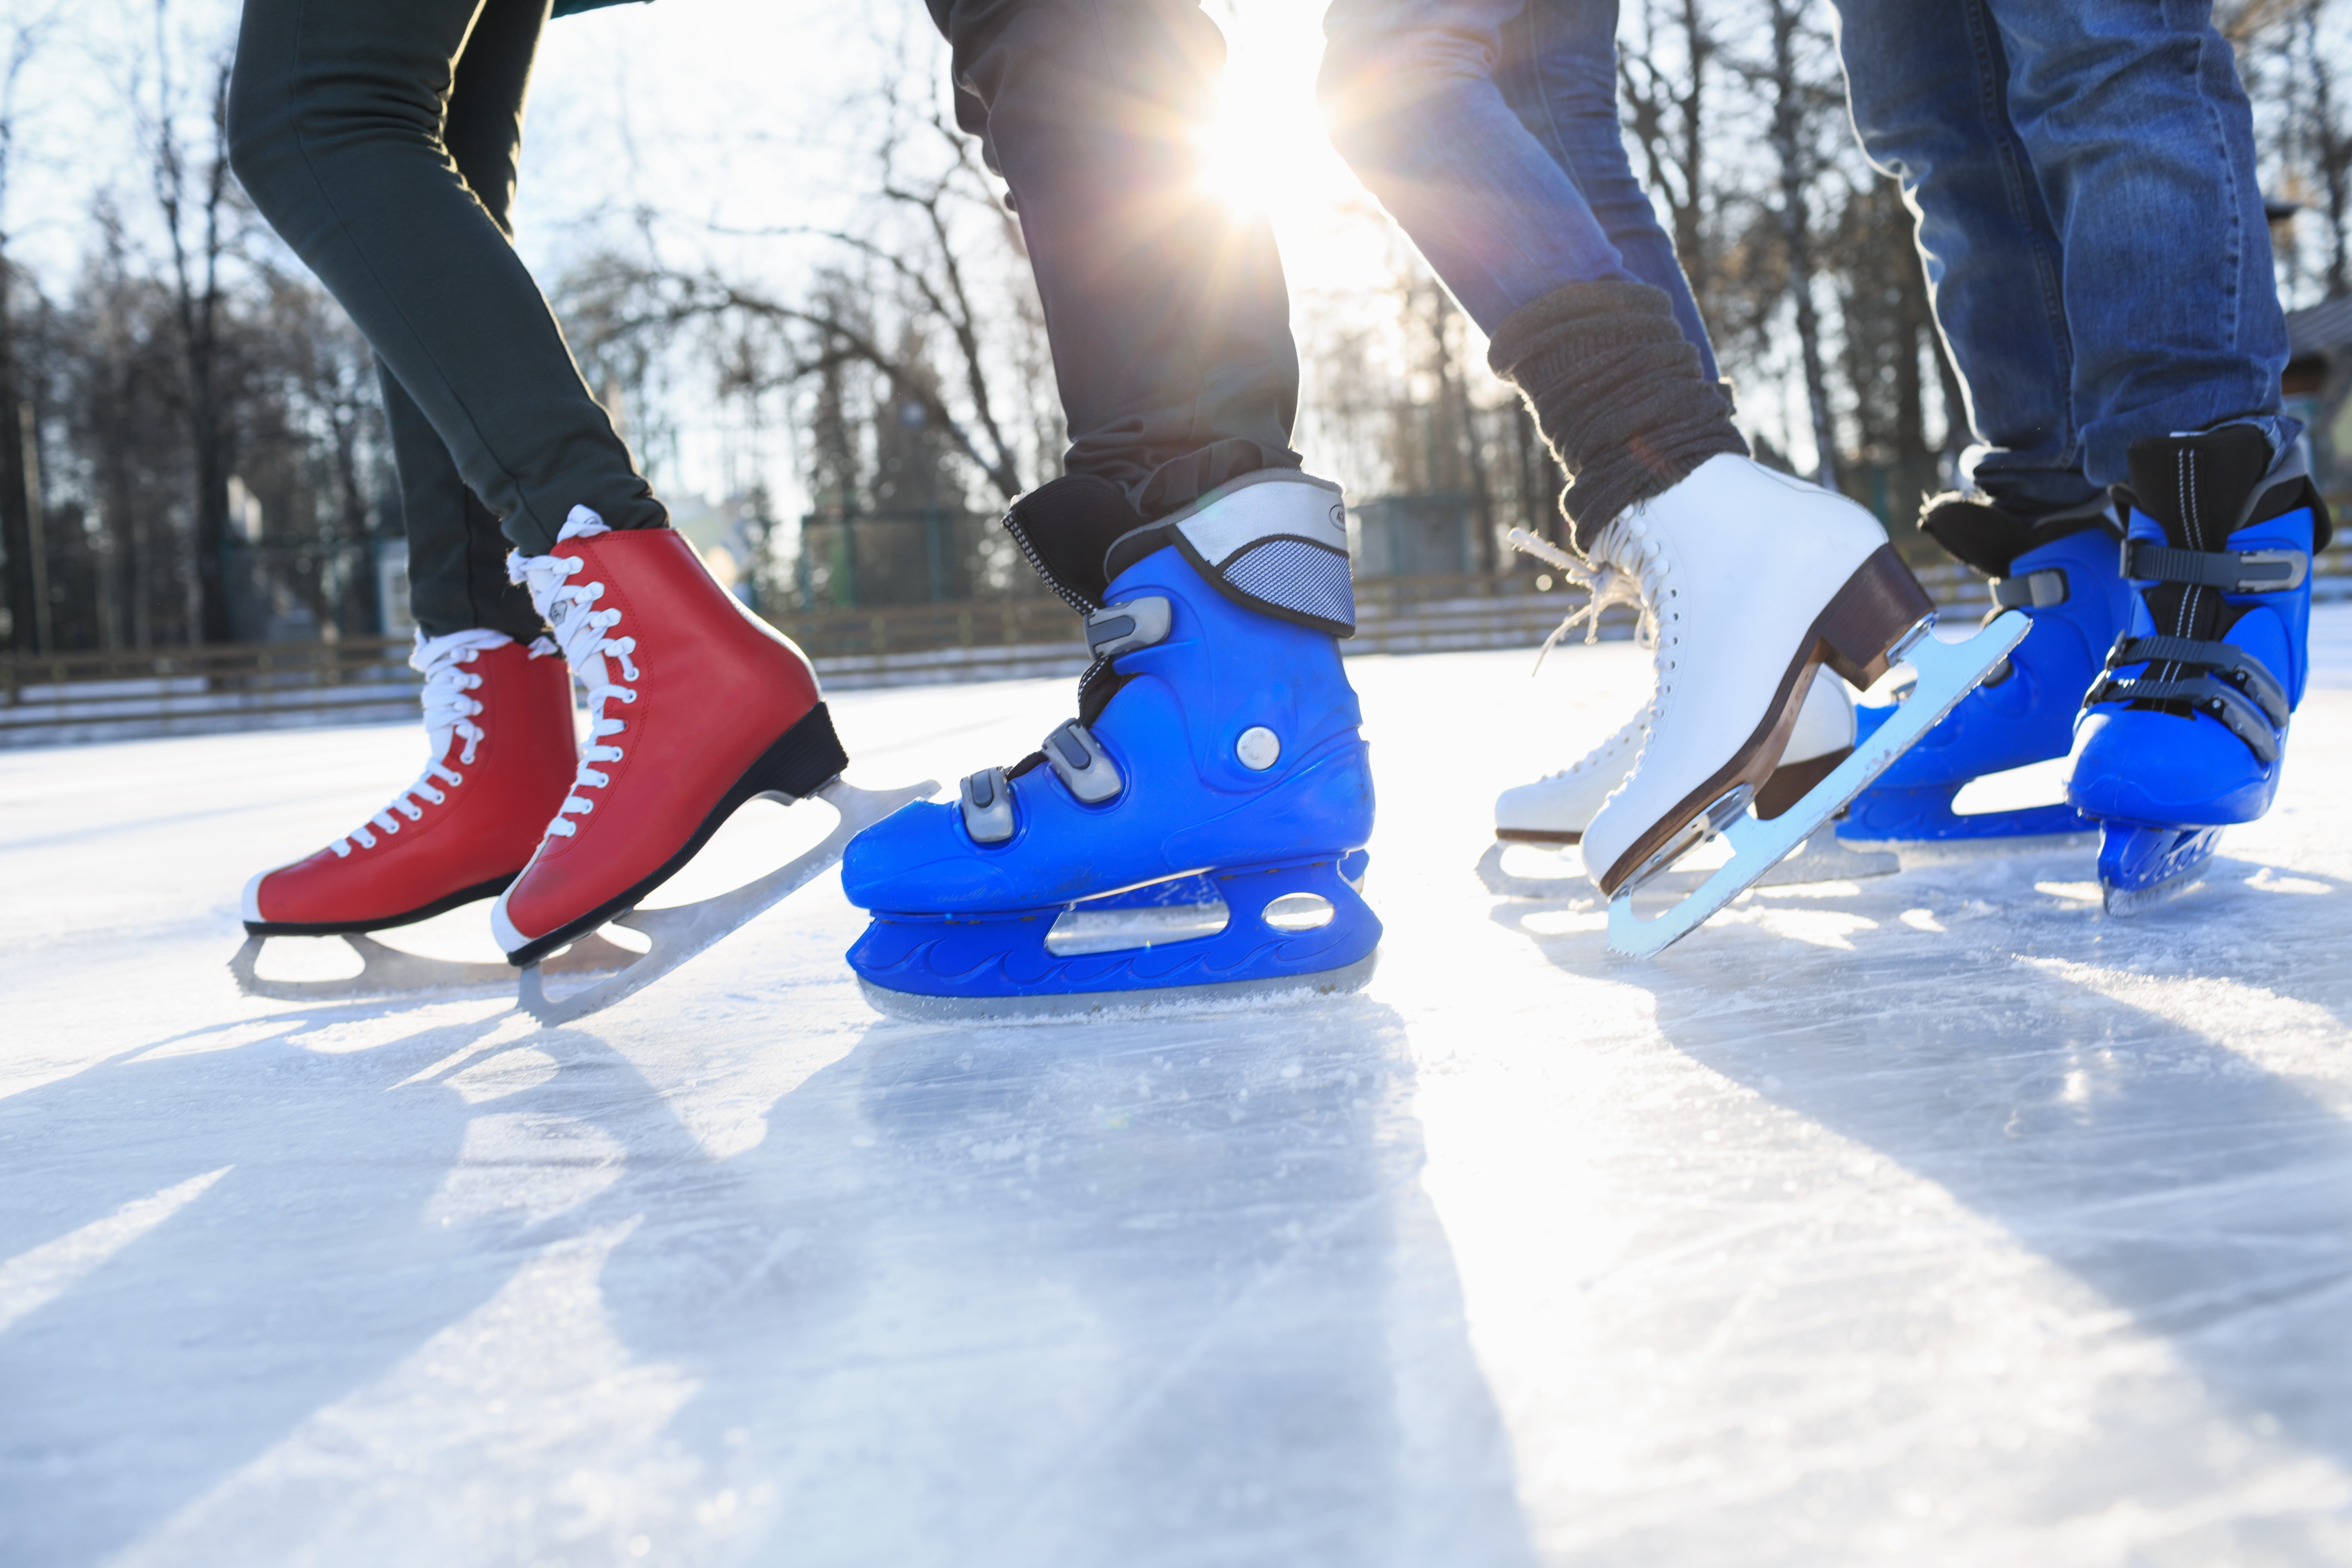 How to choose the plantar orthotics for your ice skates?